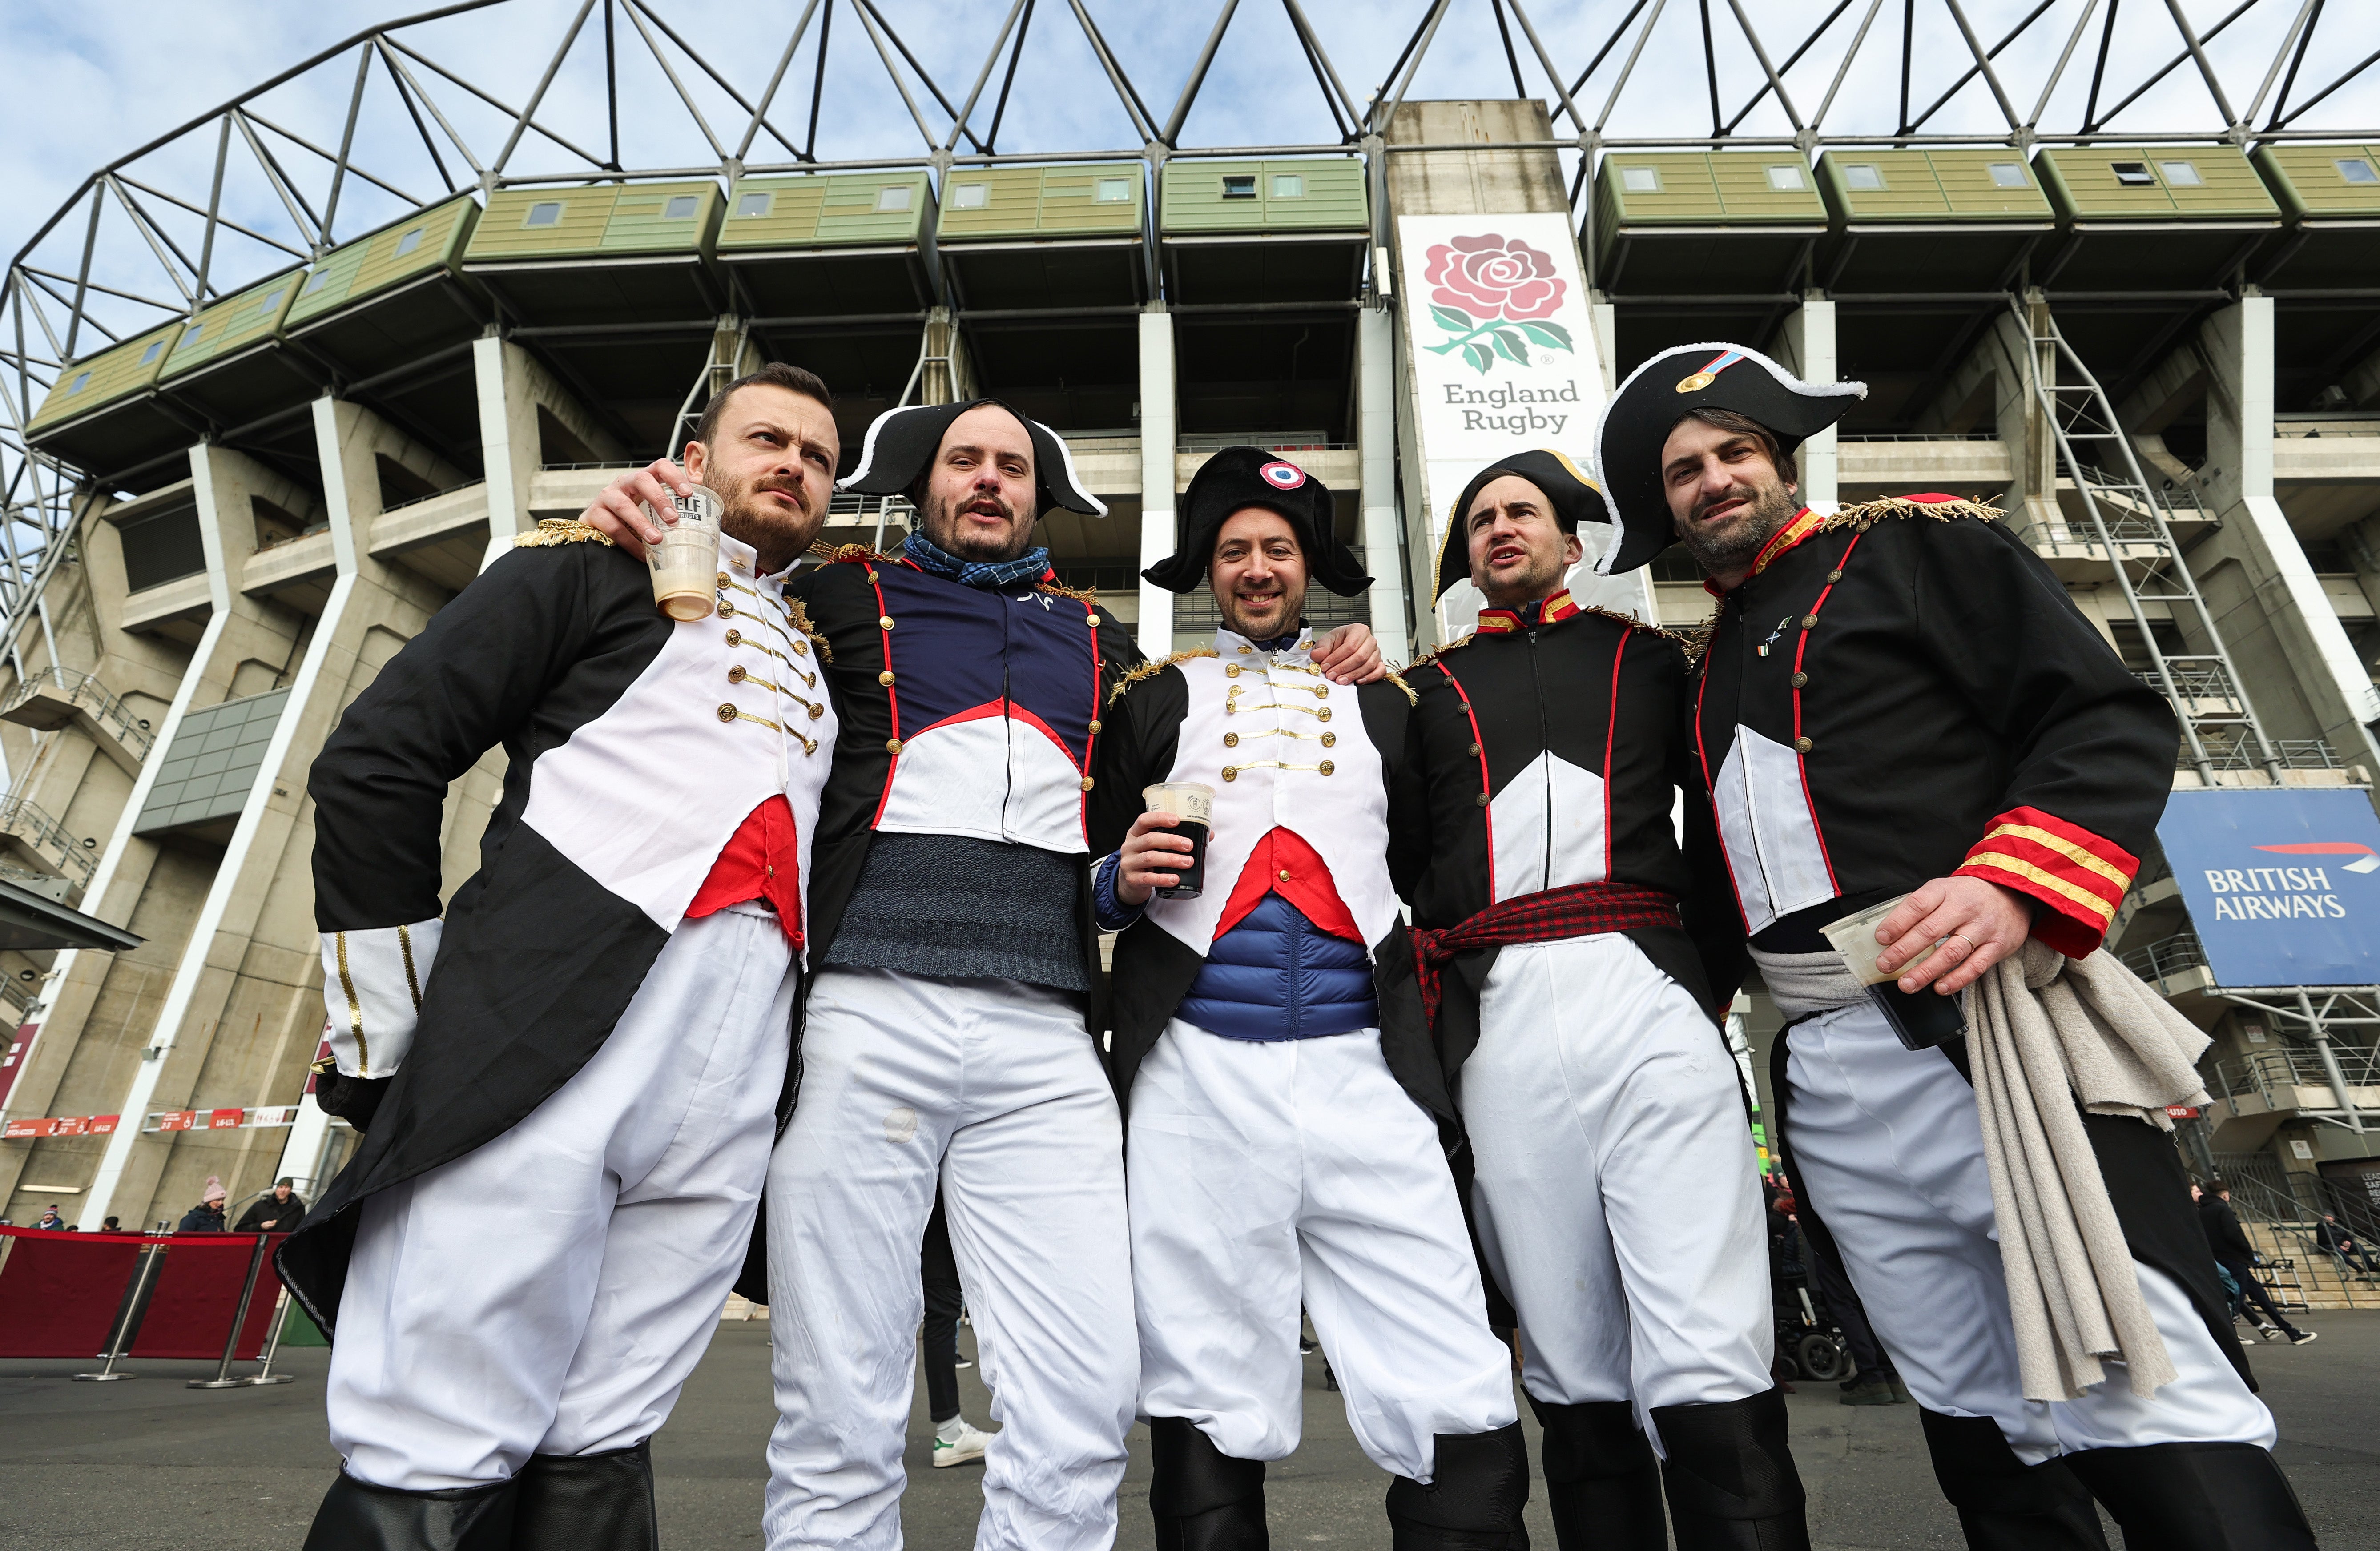 Napoleon’s legacy of being stereotypically French is embraced by these rugby fans outside Twickenham at the Six Nations game between England and France in March 2023